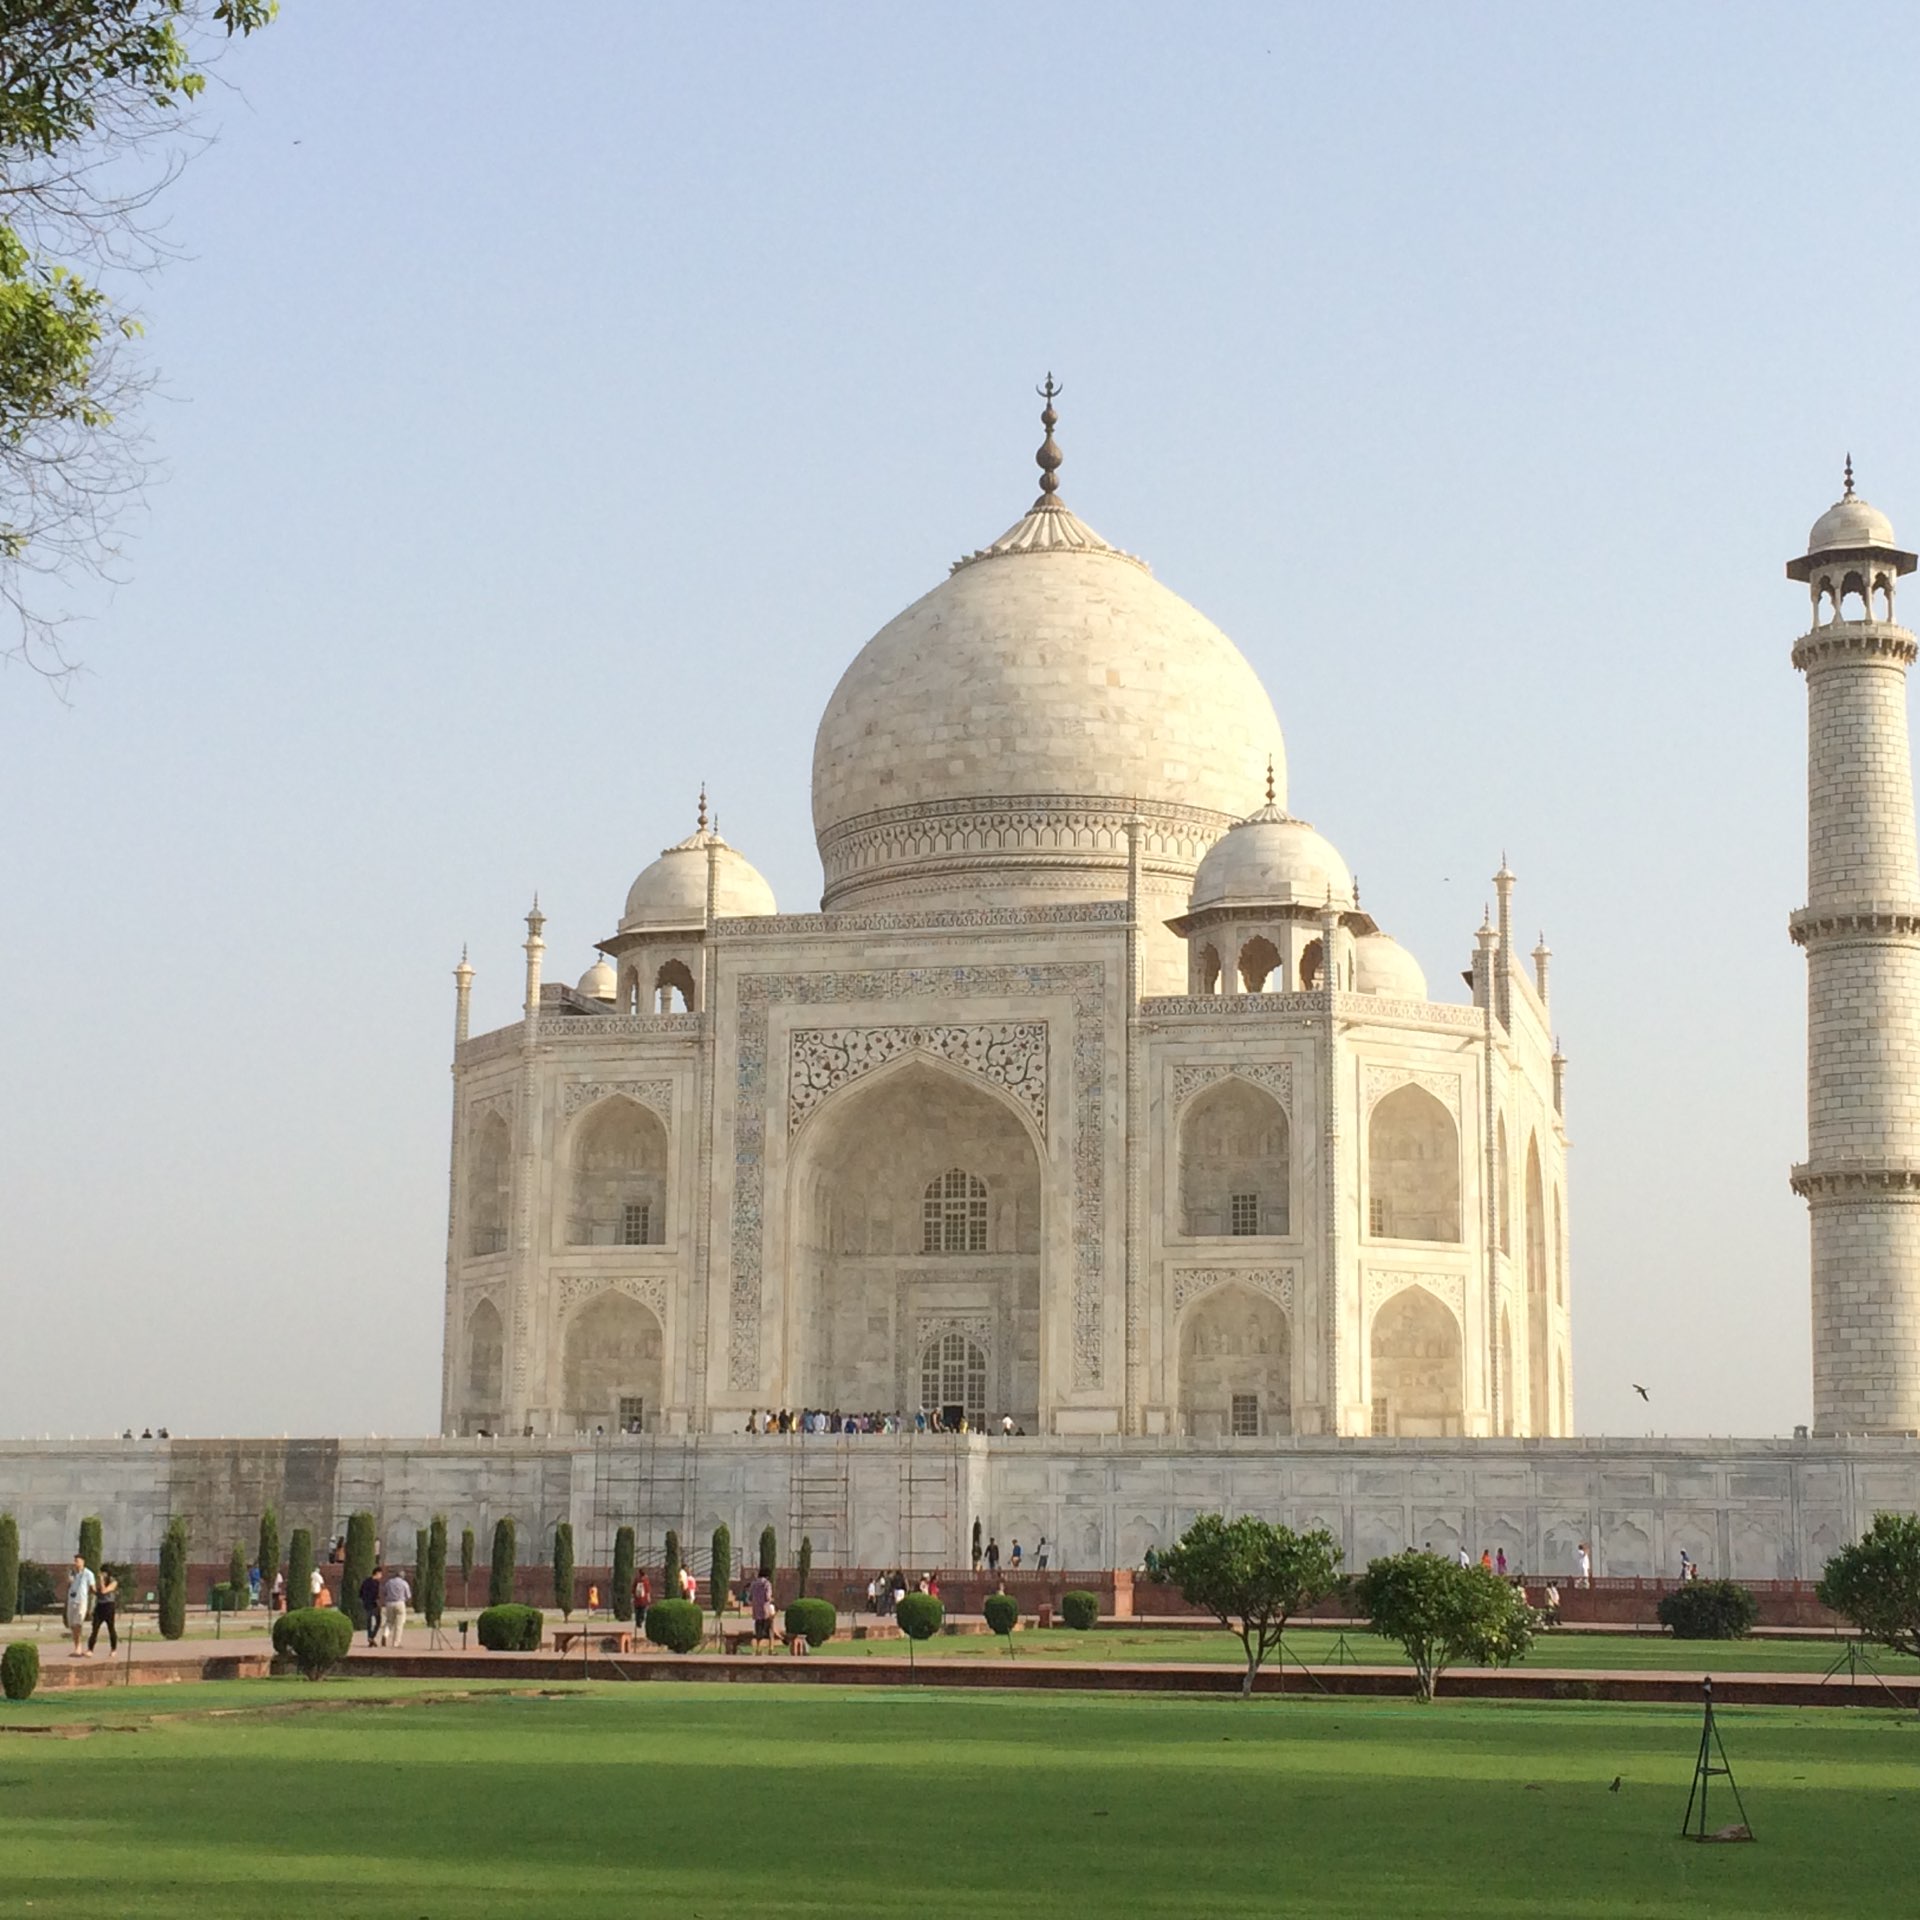 Building made out of Love-Taj Mahal  Agra Travelogues